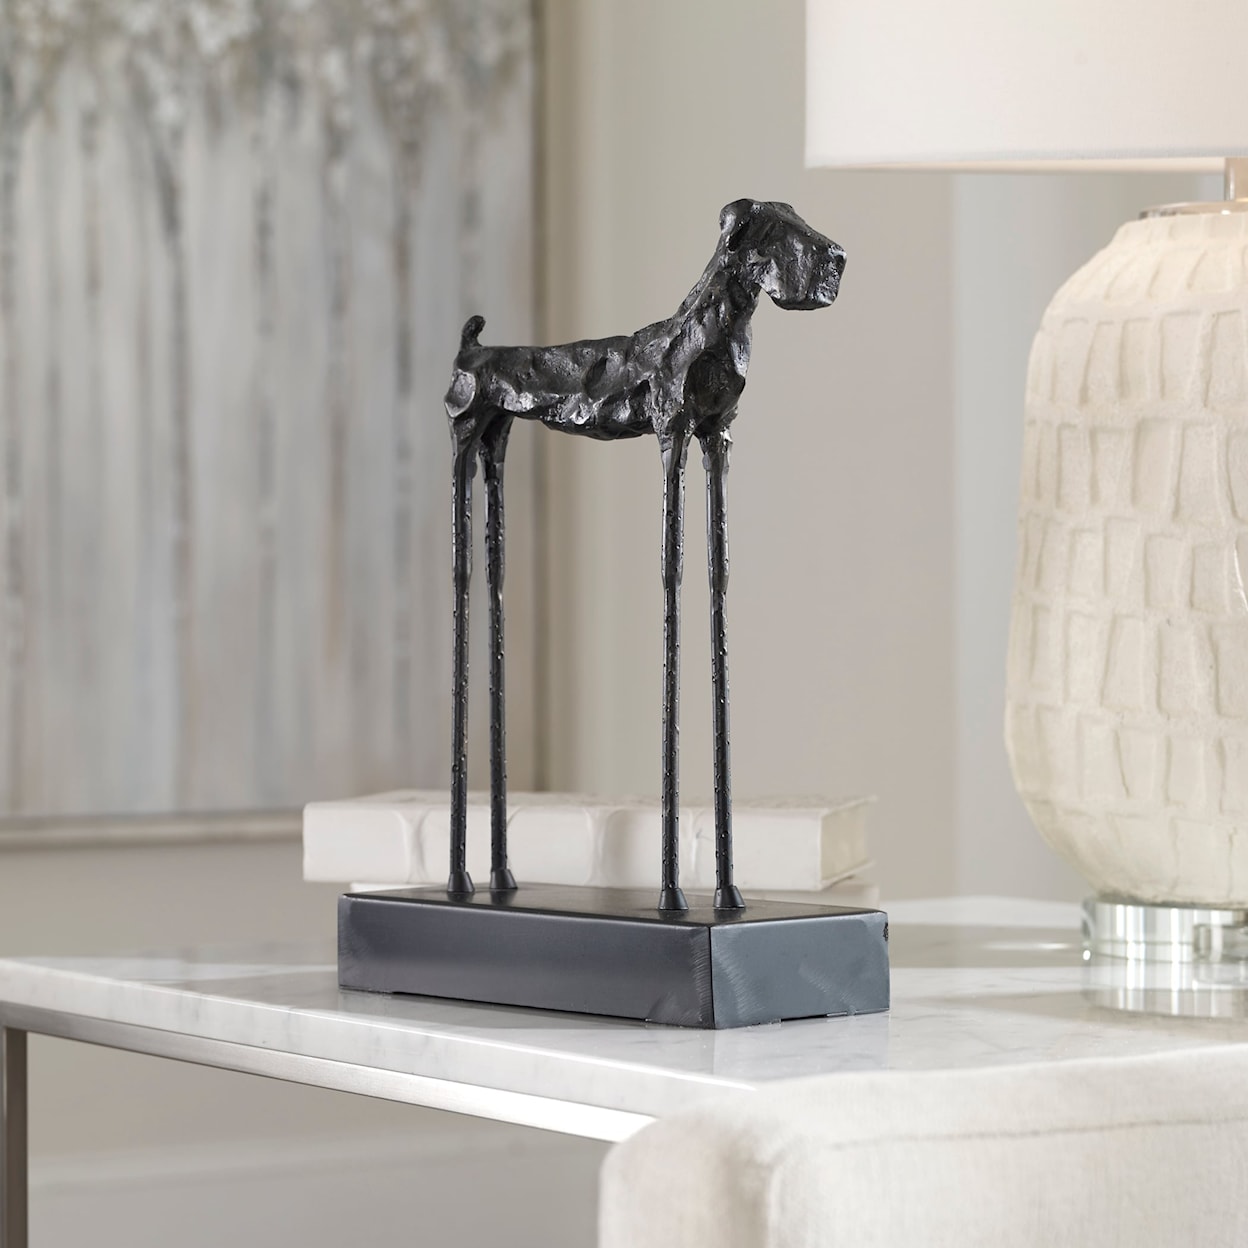 Uttermost Accessories - Statues and Figurines Maximus Cast Iron Sculpture